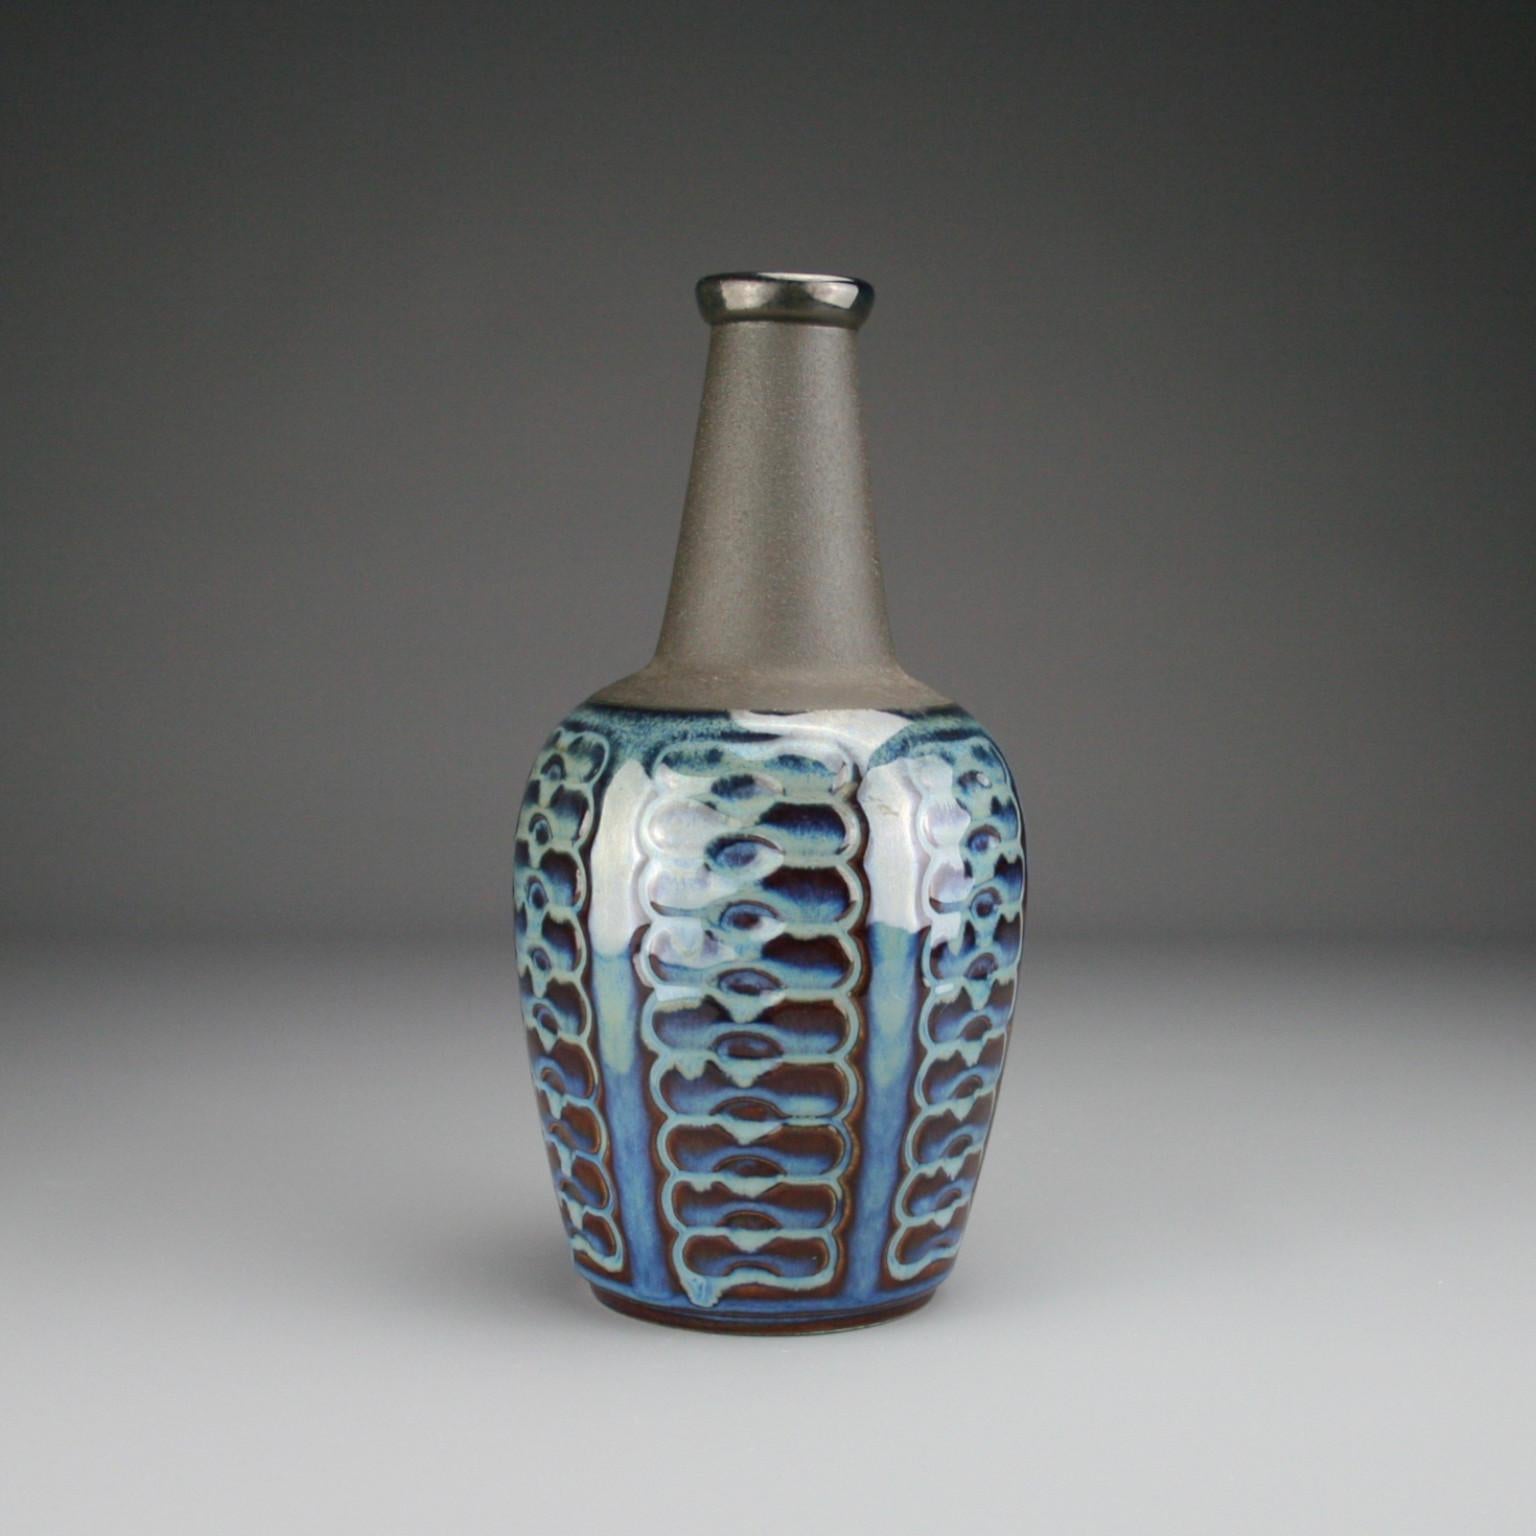 This vase is by Danish ceramicist Einar Johansen and is from his well known “blue series” which are highly sought after today among collectors. Born in 1906, Einar Johansen was a Danish ceramicist, who trained as a painter at the Royal Danish